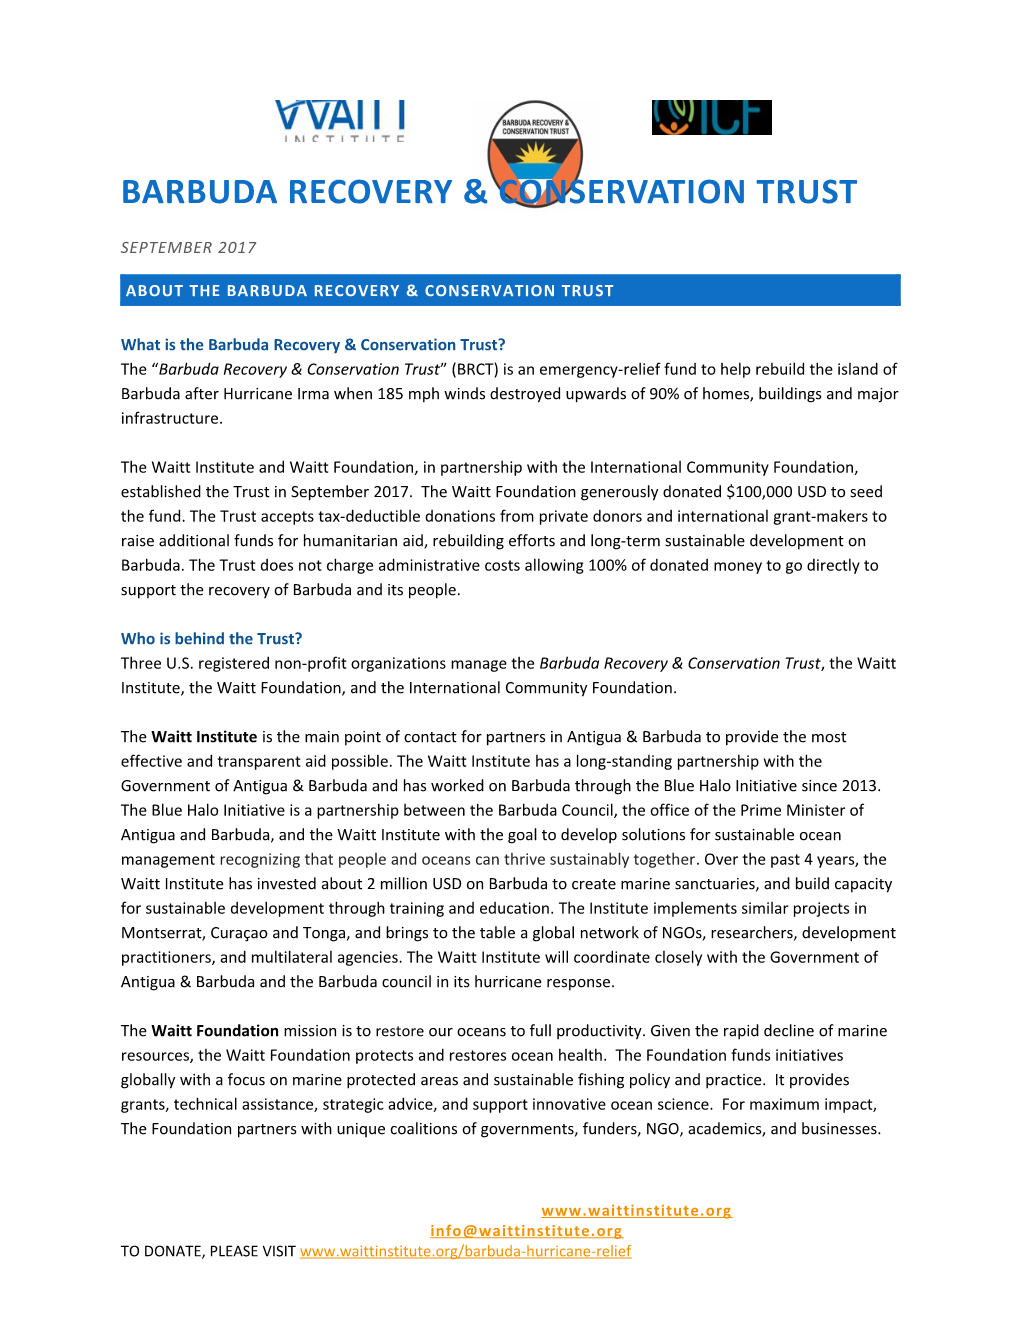 About the Barbuda Recovery & Conservation Trust